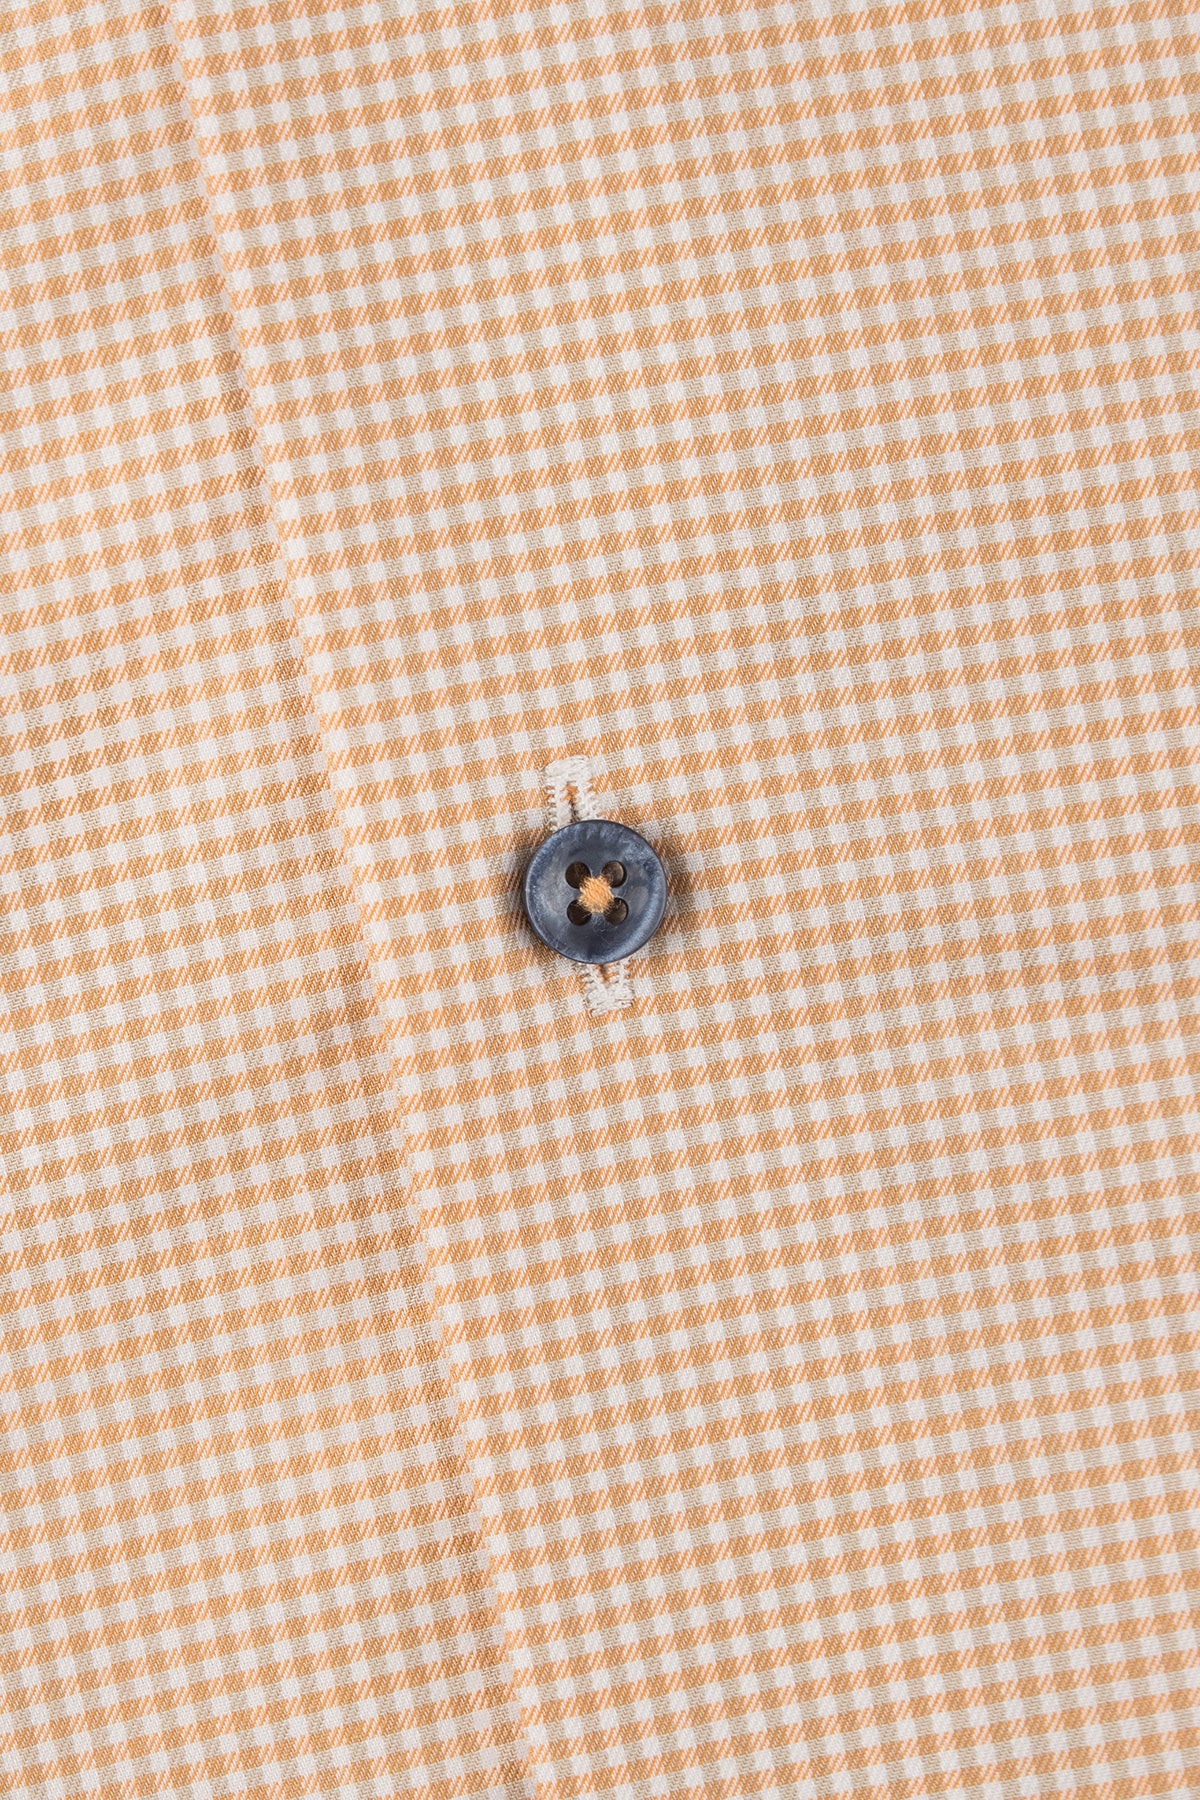 Orange checked slim fit shirt with contrast details